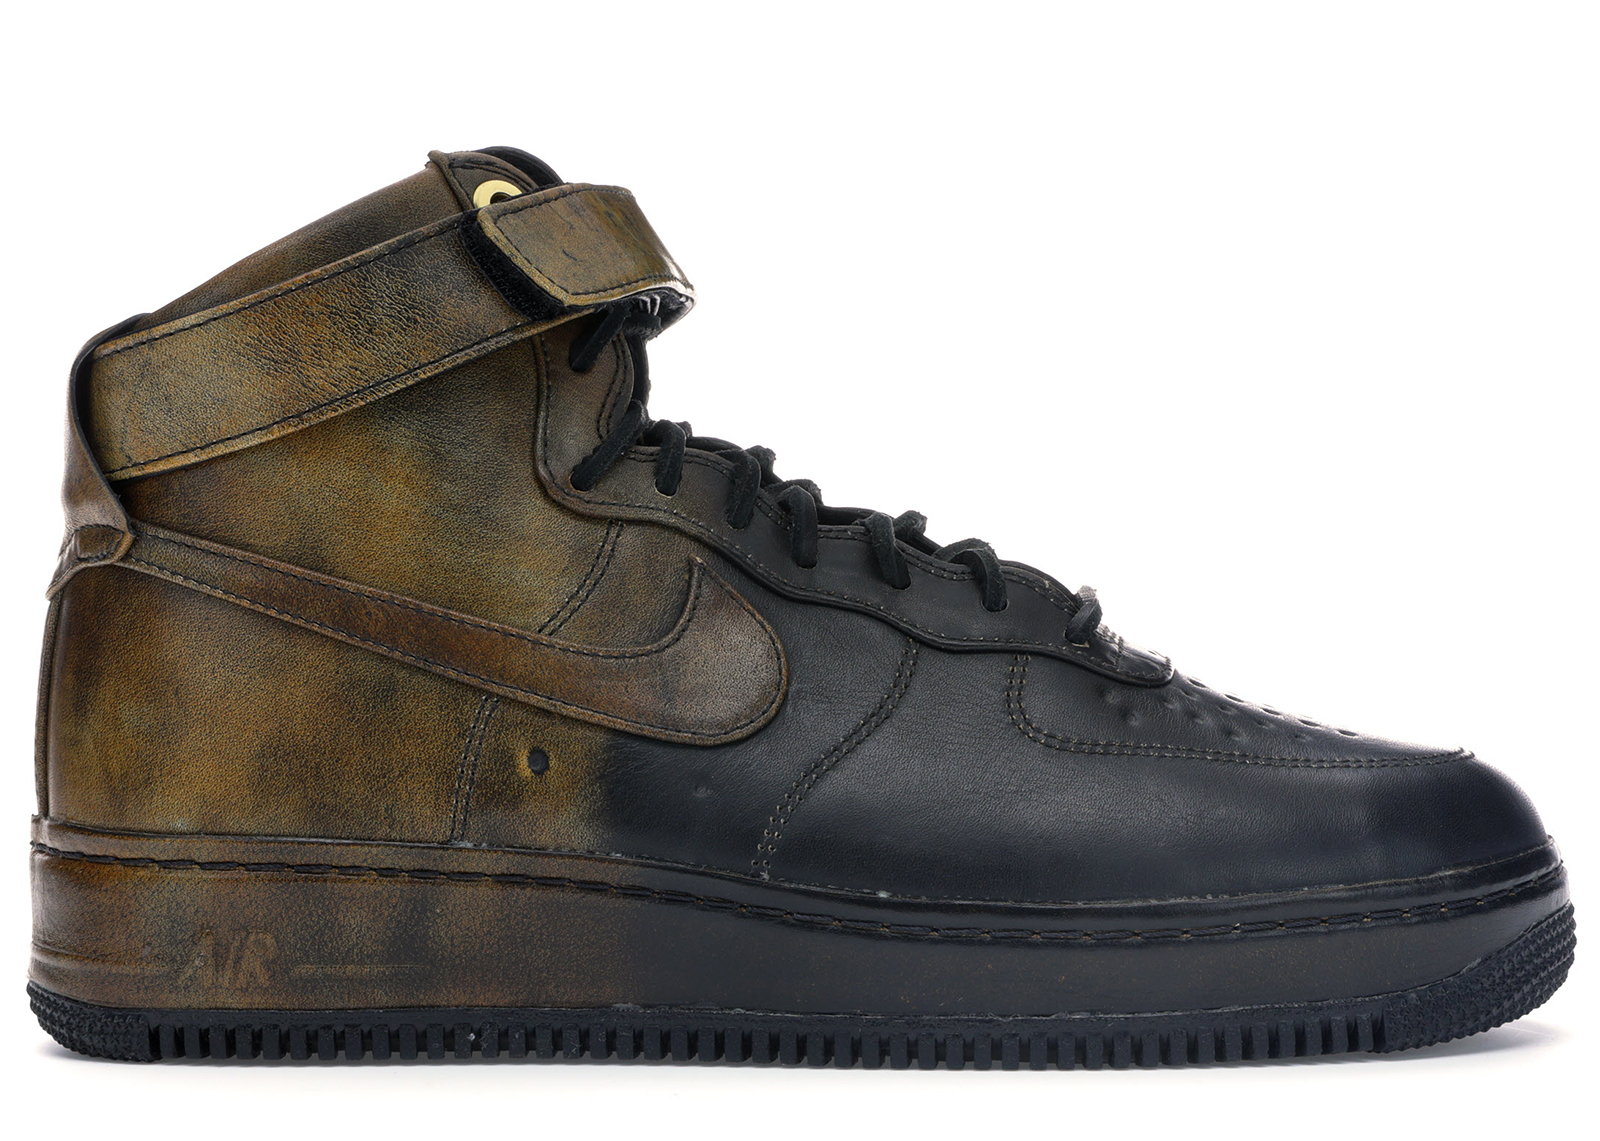 black and gold air force 1 high top